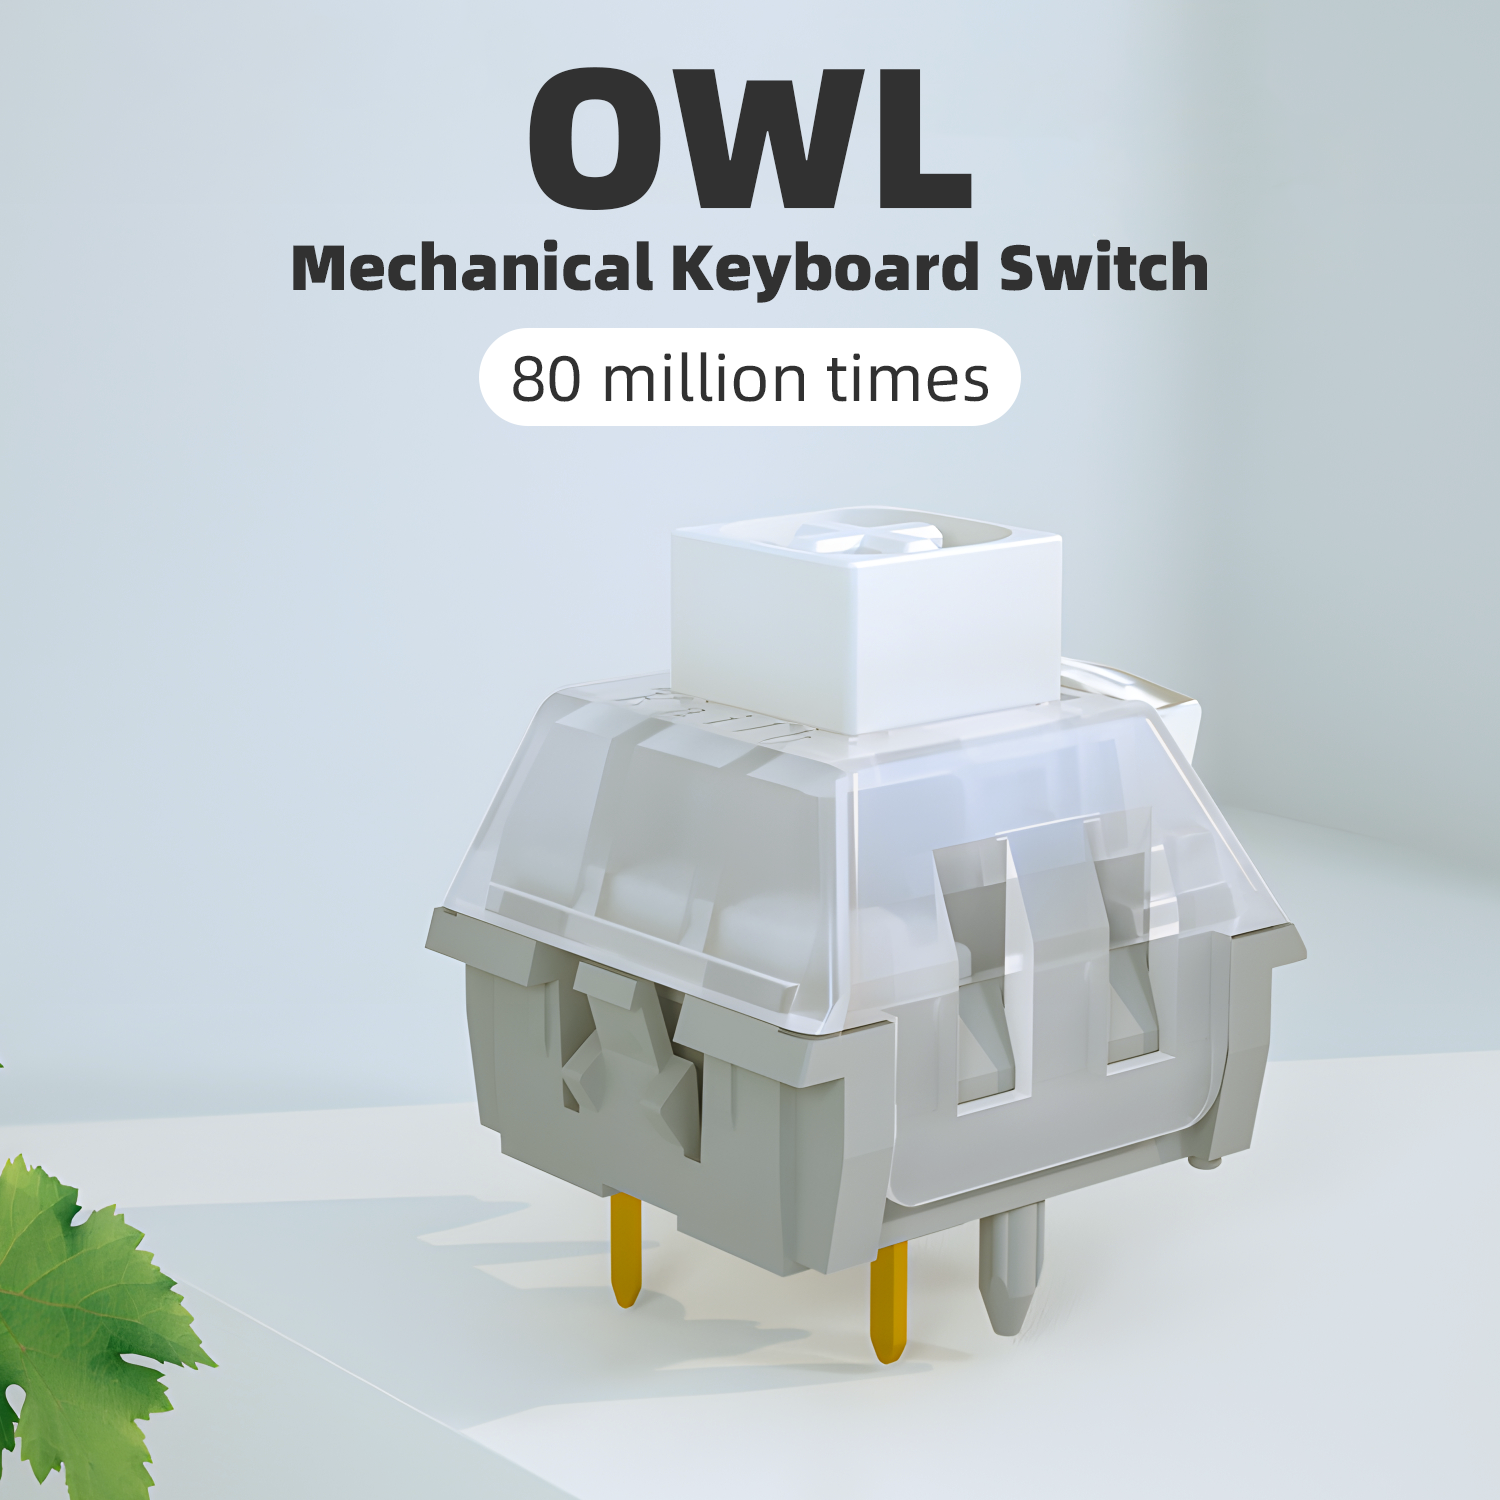 Kailh Box Owl White Switch Mechanical Keyboard Switch Waterproof and Dustproof